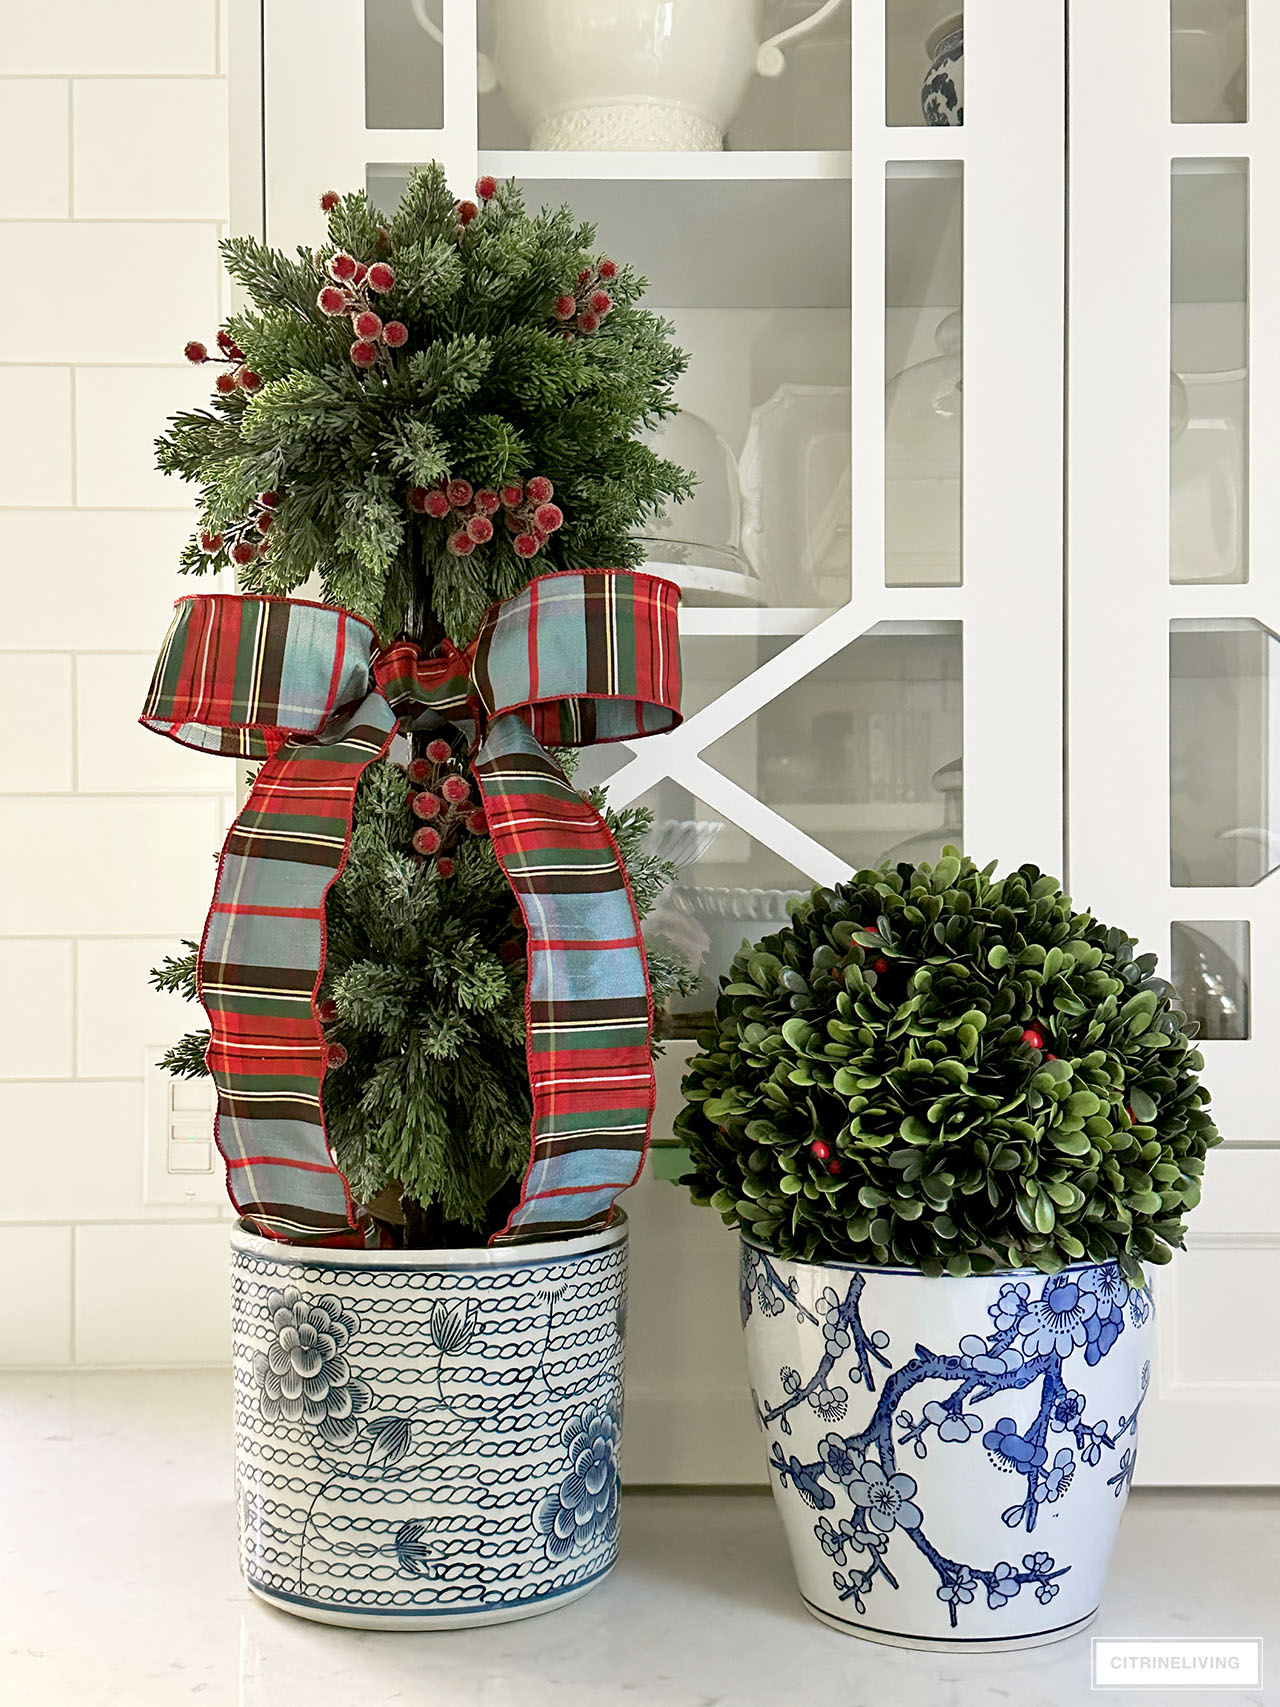 Christmas topiaries with red berries accented in plaid ribbon and chinoiserie planters